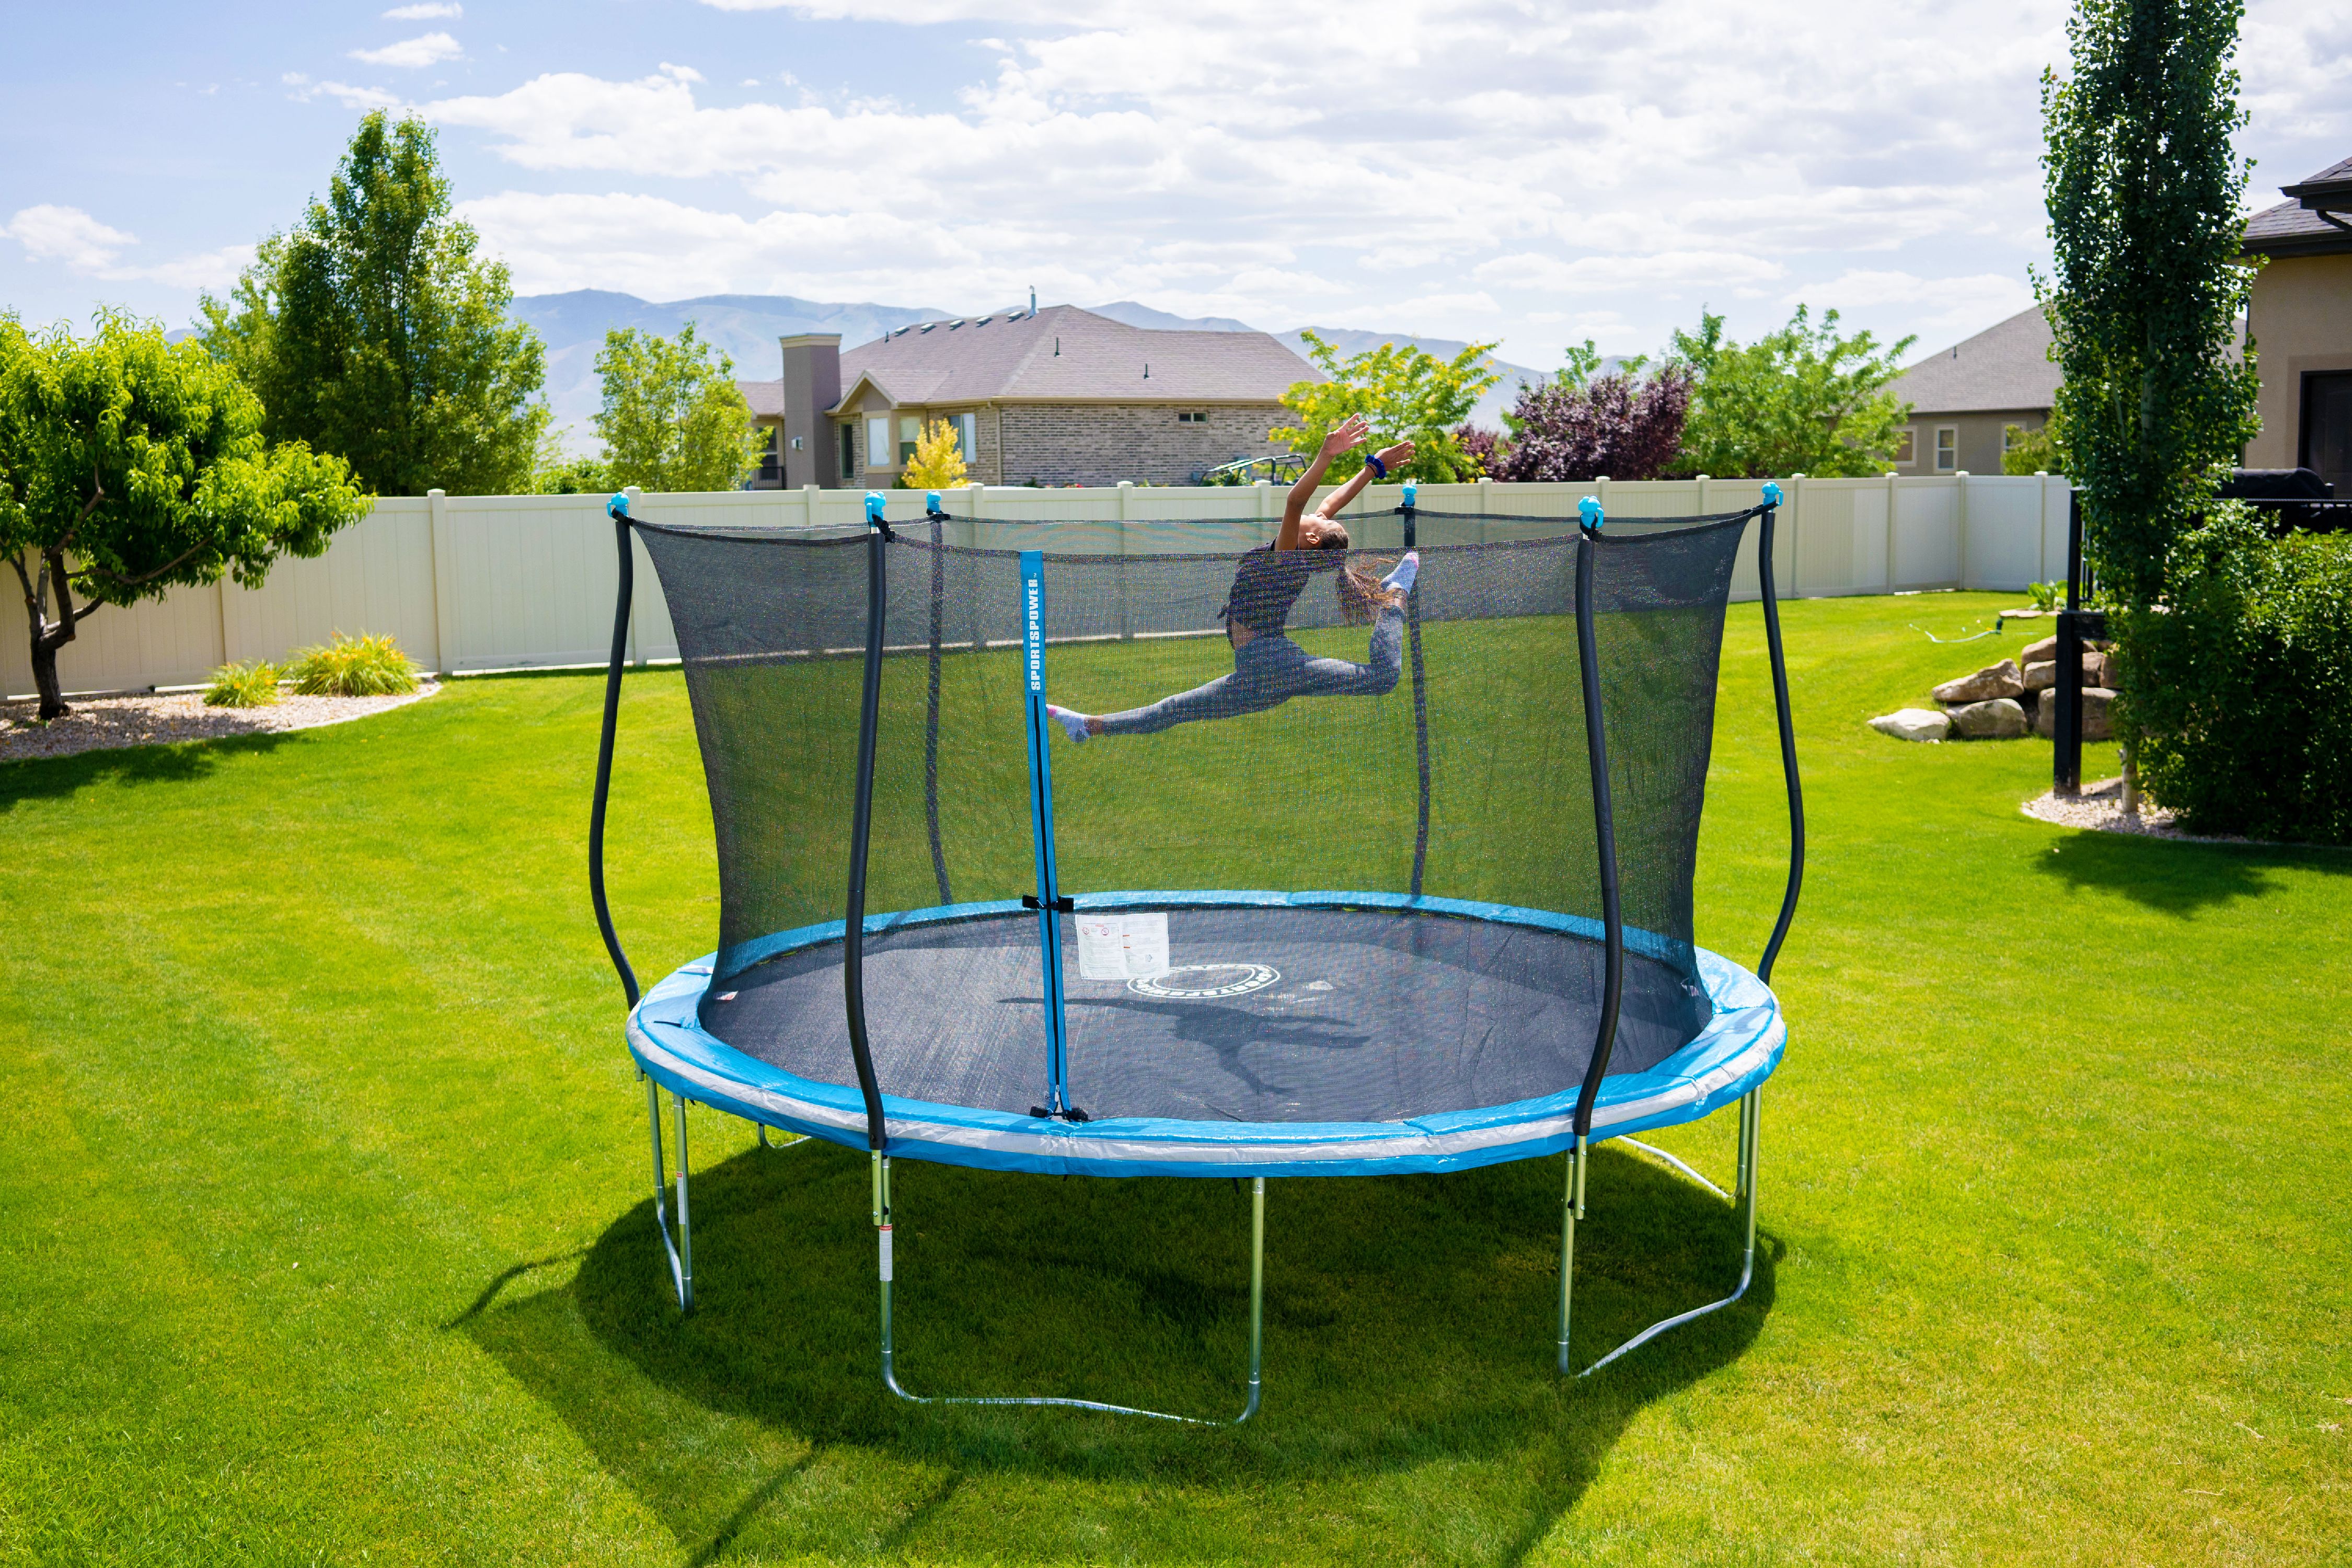 Bounce Pro 14' Trampoline, Classic Safety Enclosure, Blue - image 4 of 8